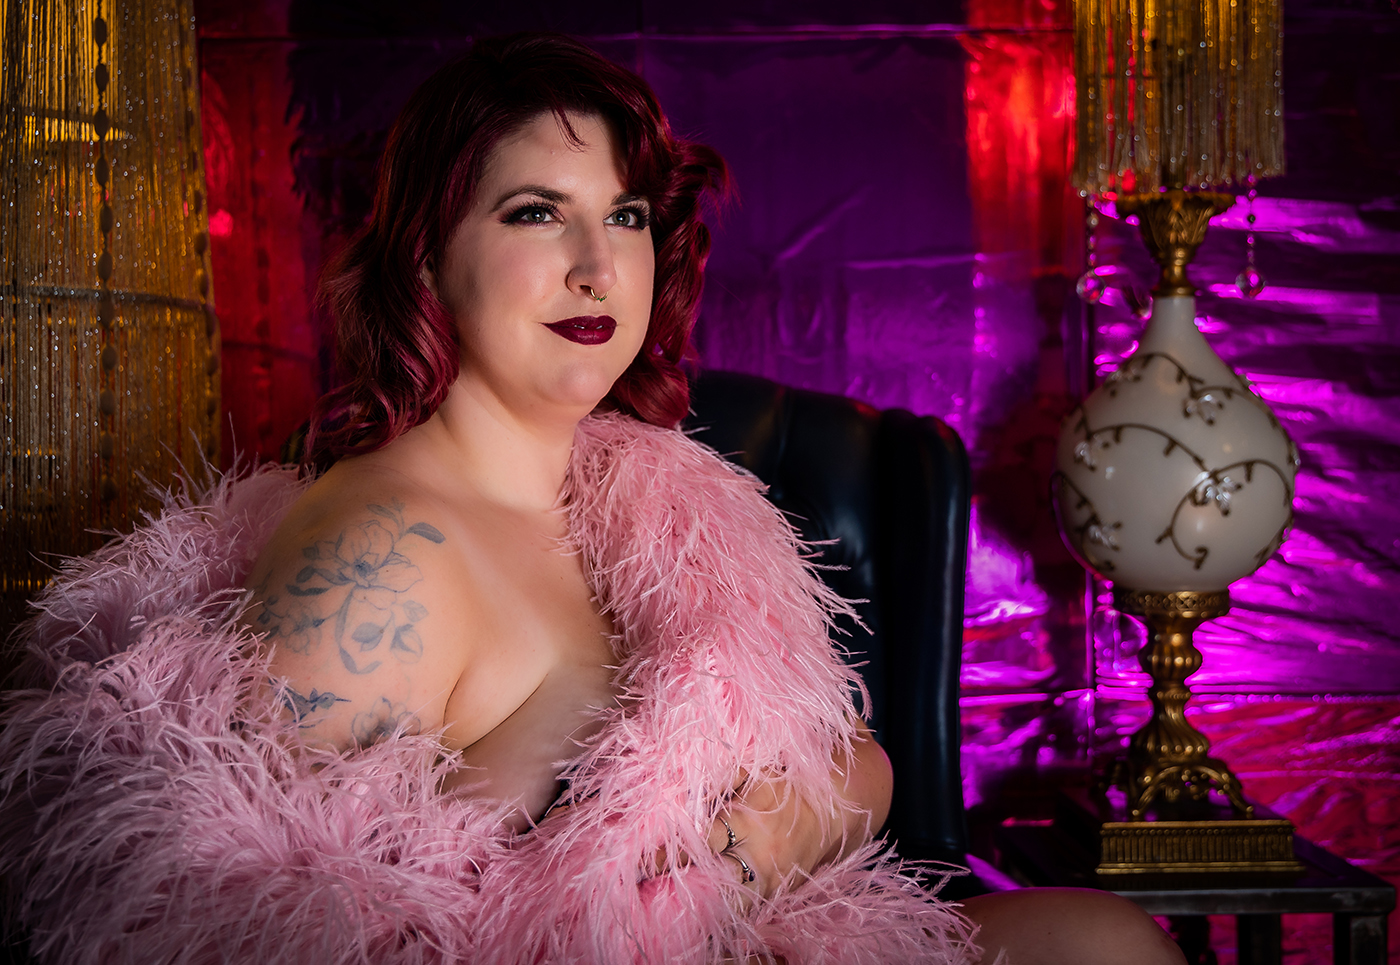 Burlesque is more than a performance for Meadow Lark; it is an empowering, freeing and creative outlet.